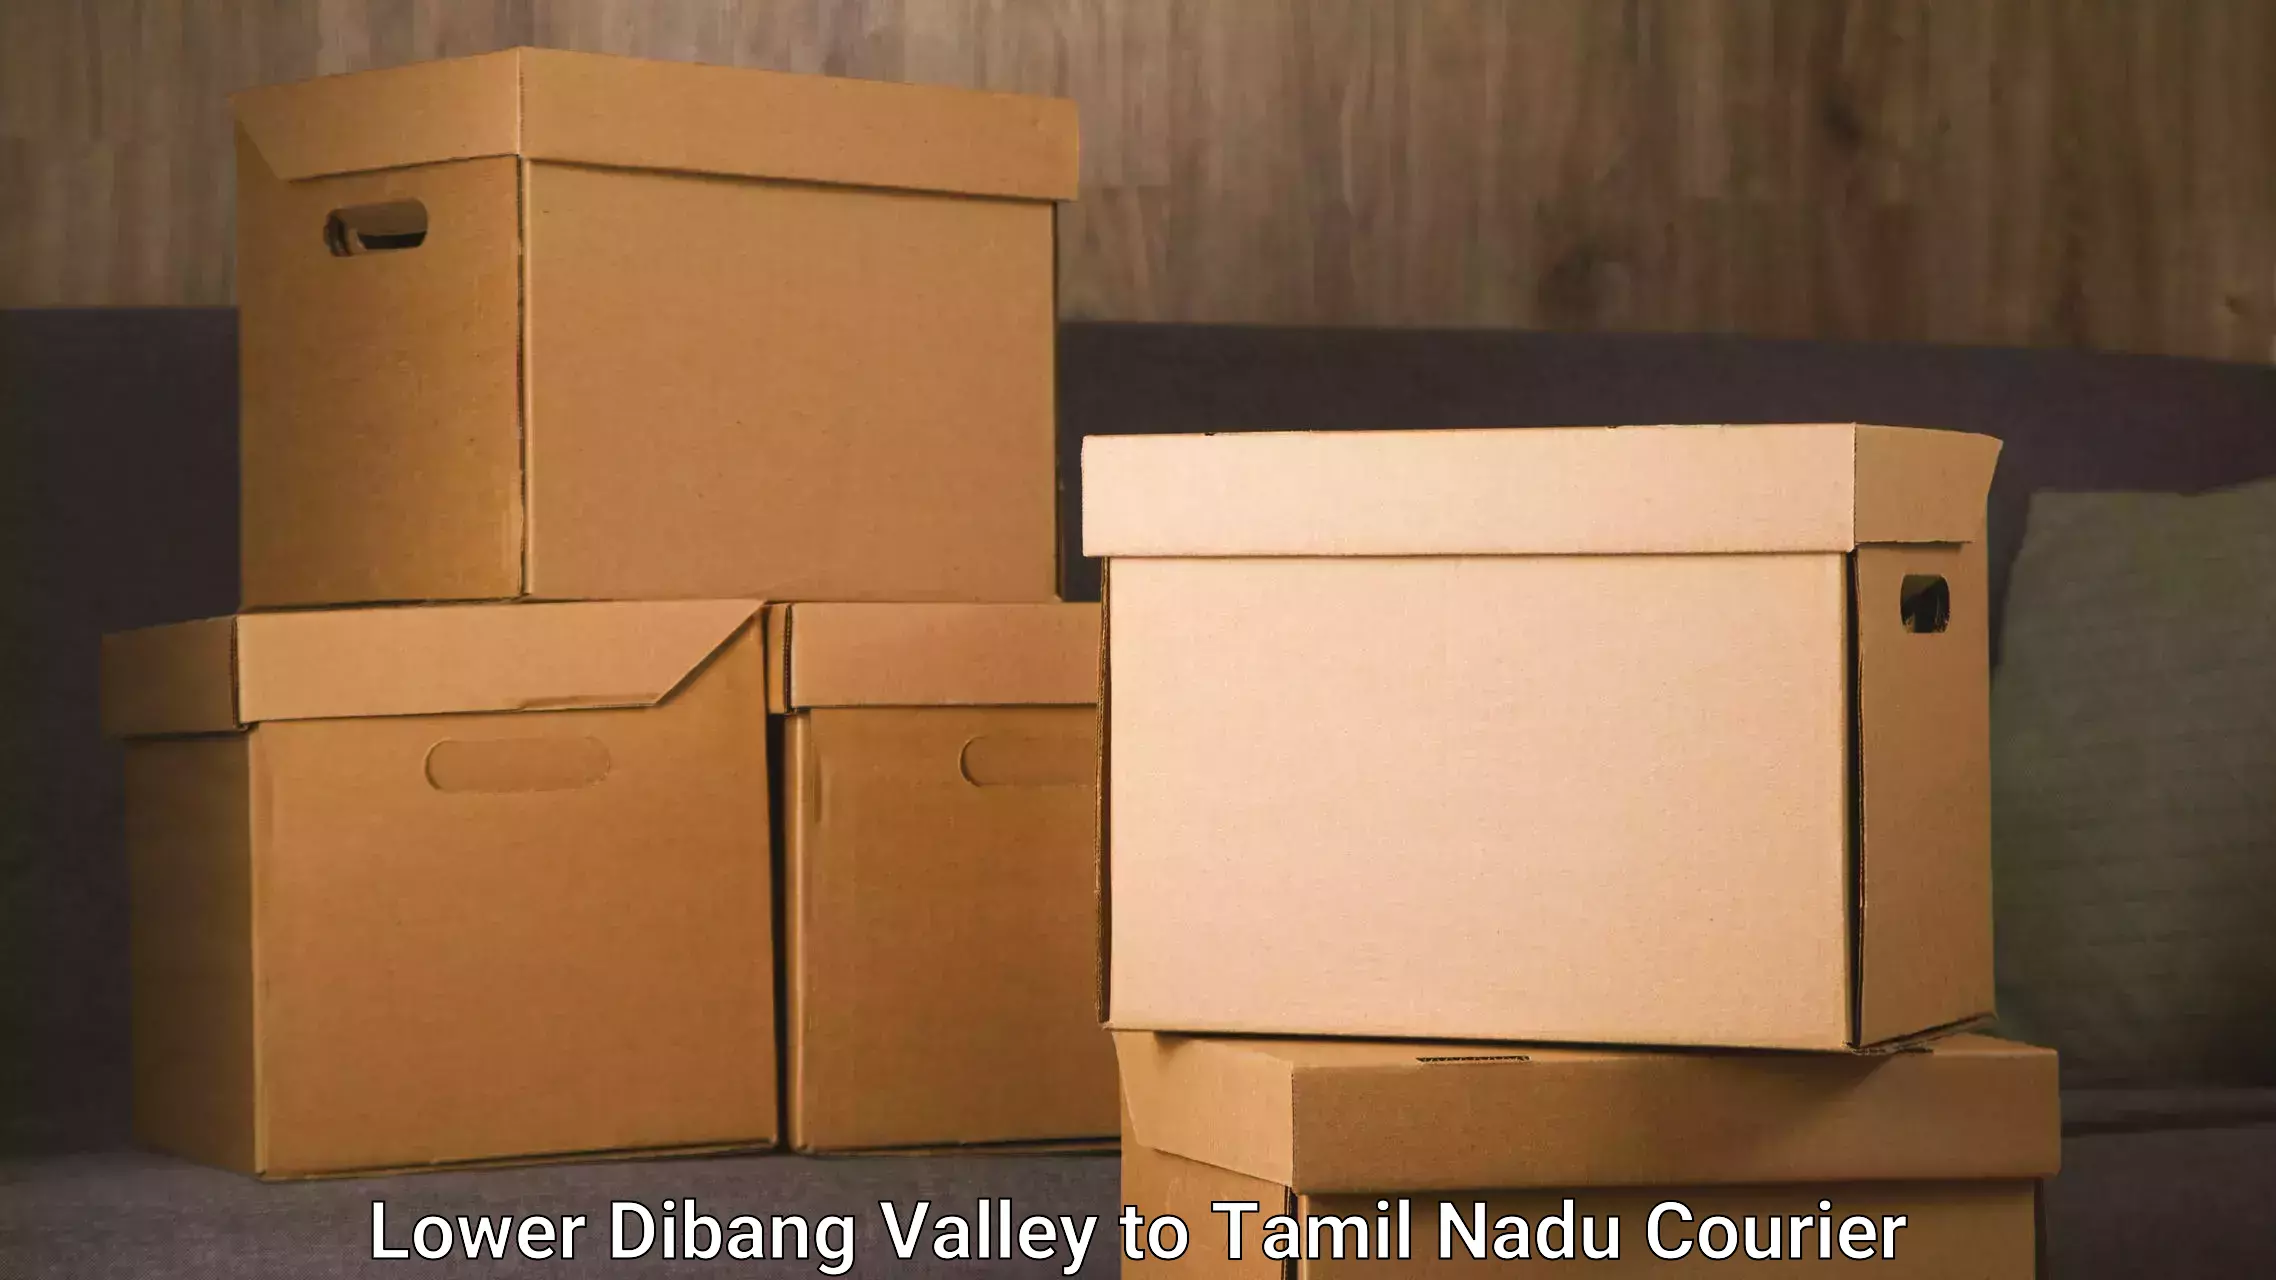 Courier service partnerships Lower Dibang Valley to Palani